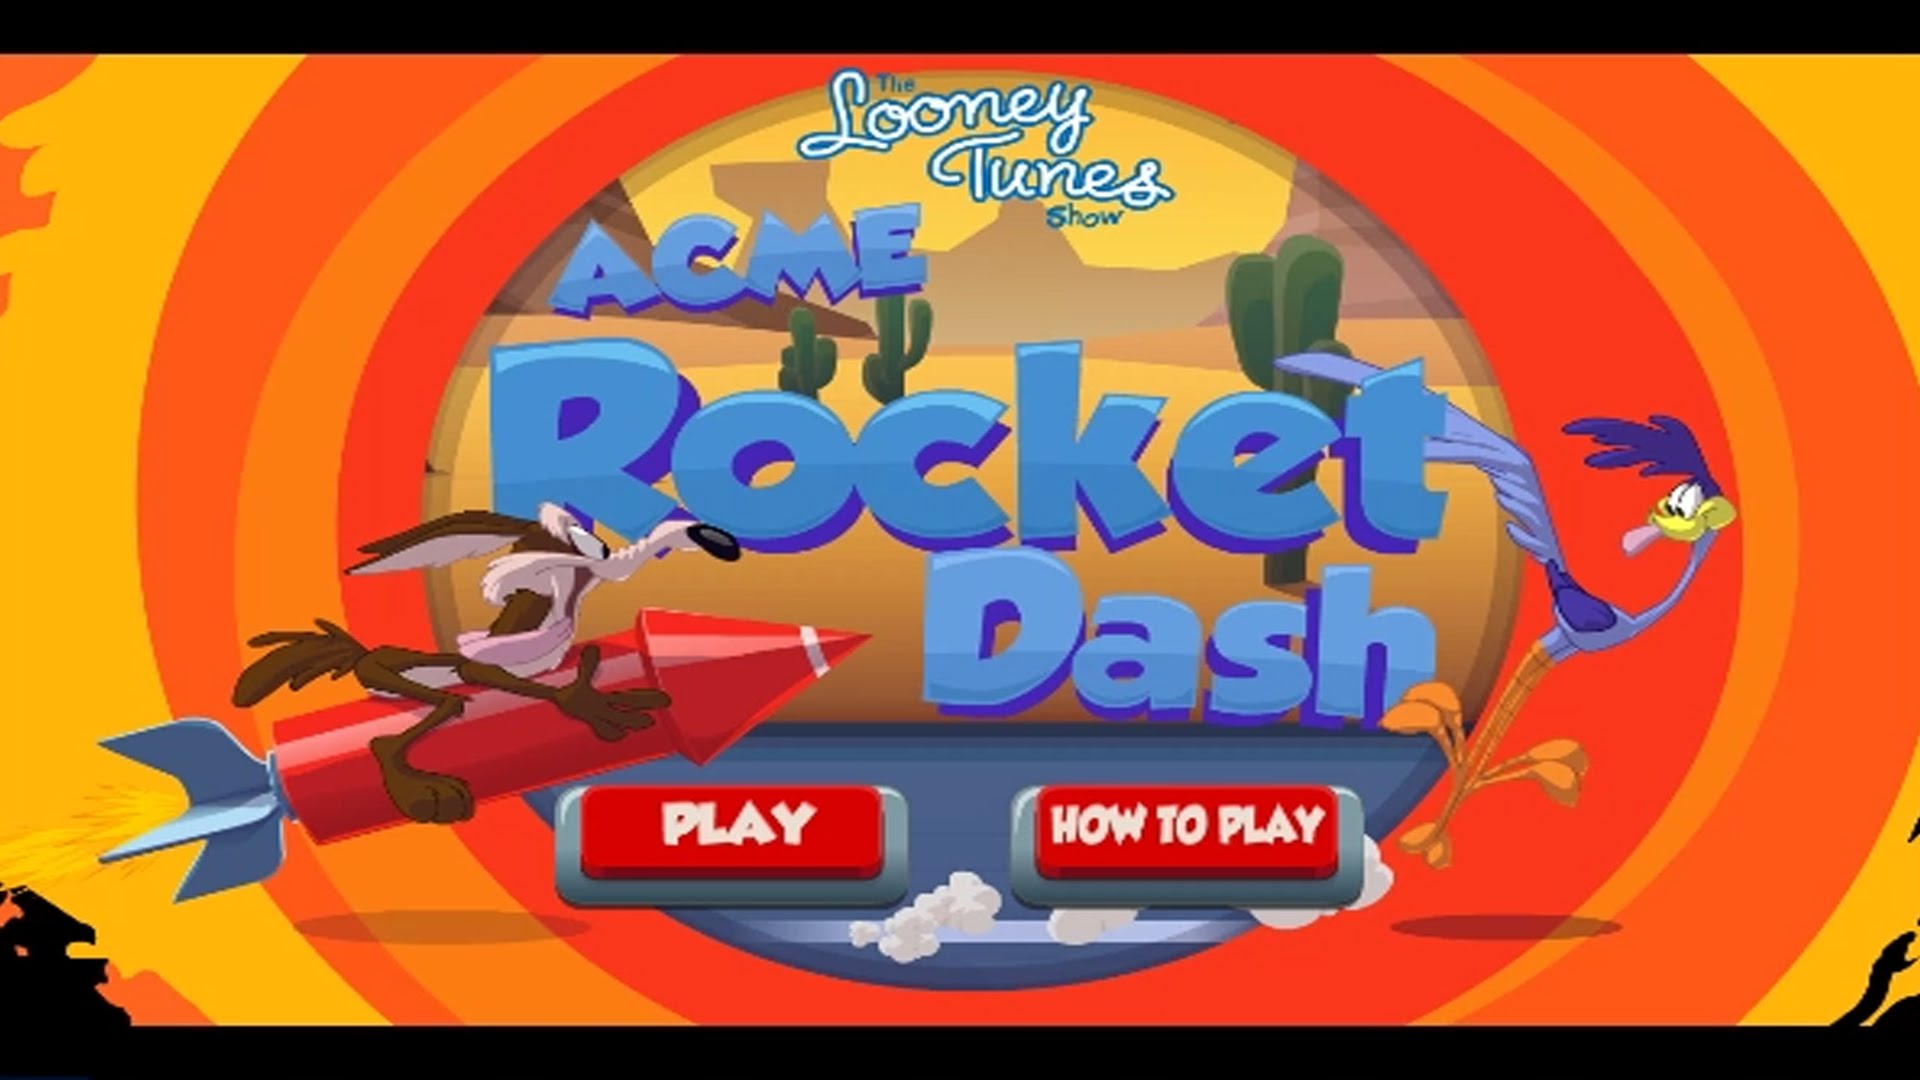 looney tunes dash games free online play